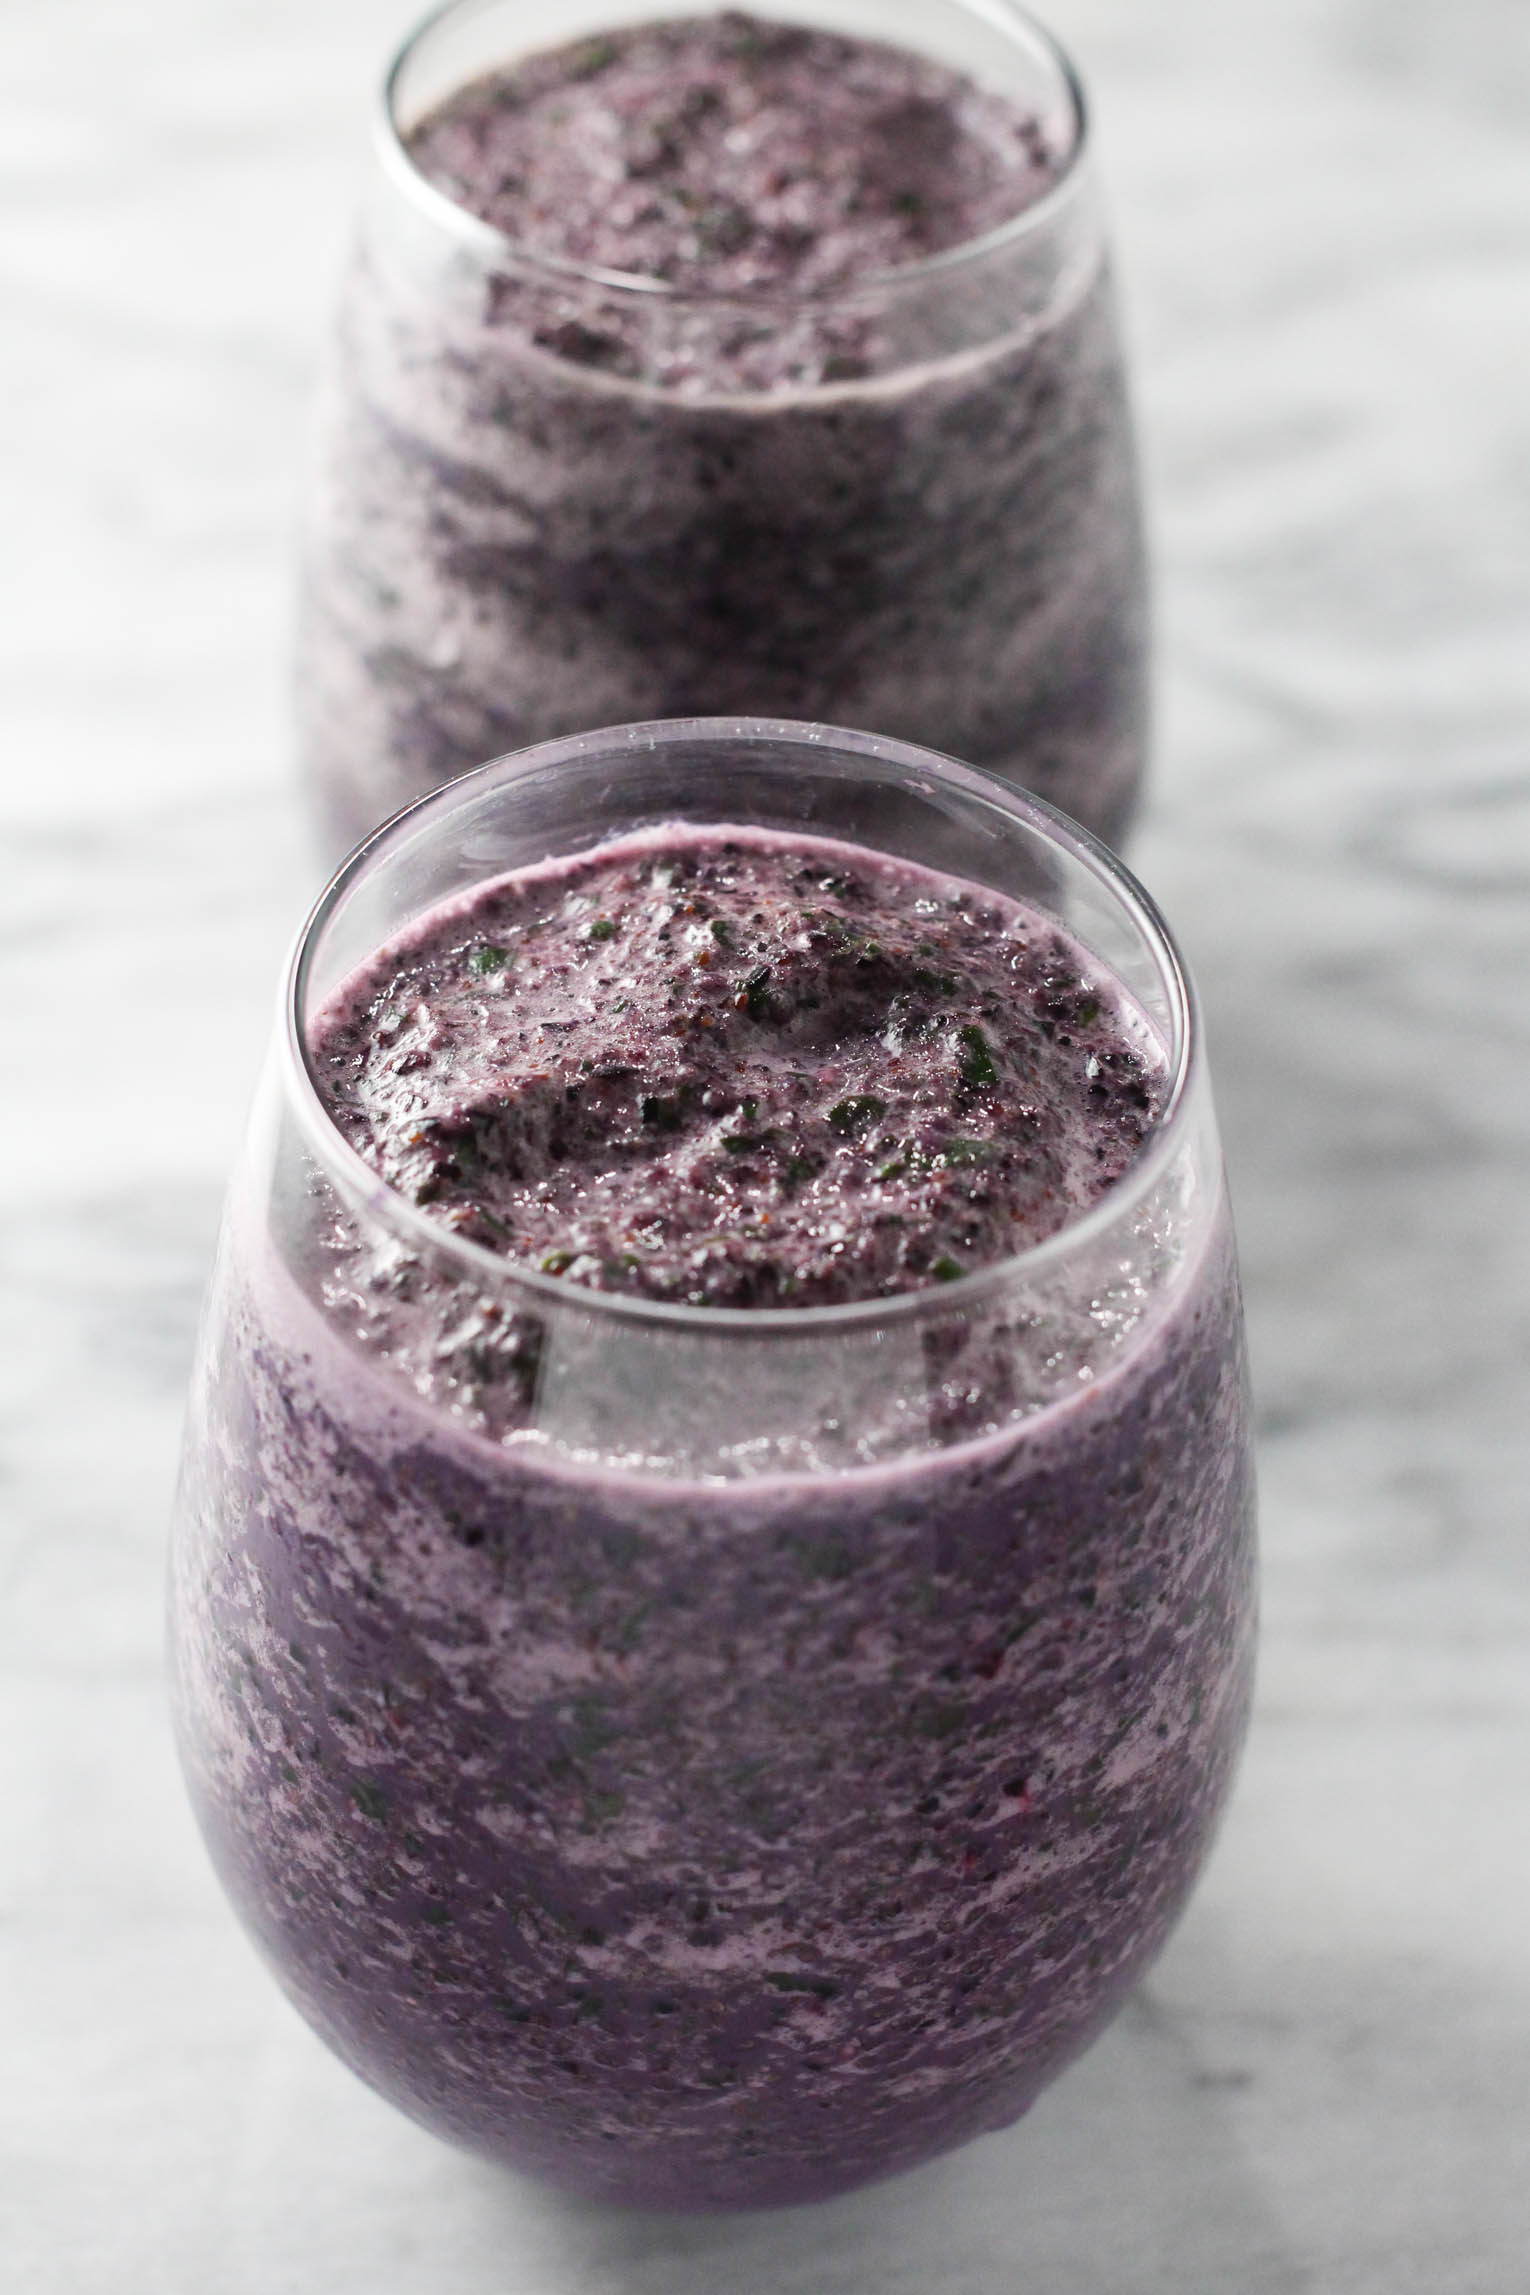 Close up shot of the blueberry kale smoothie in a glass. There is another glass with the smoothie in the background.